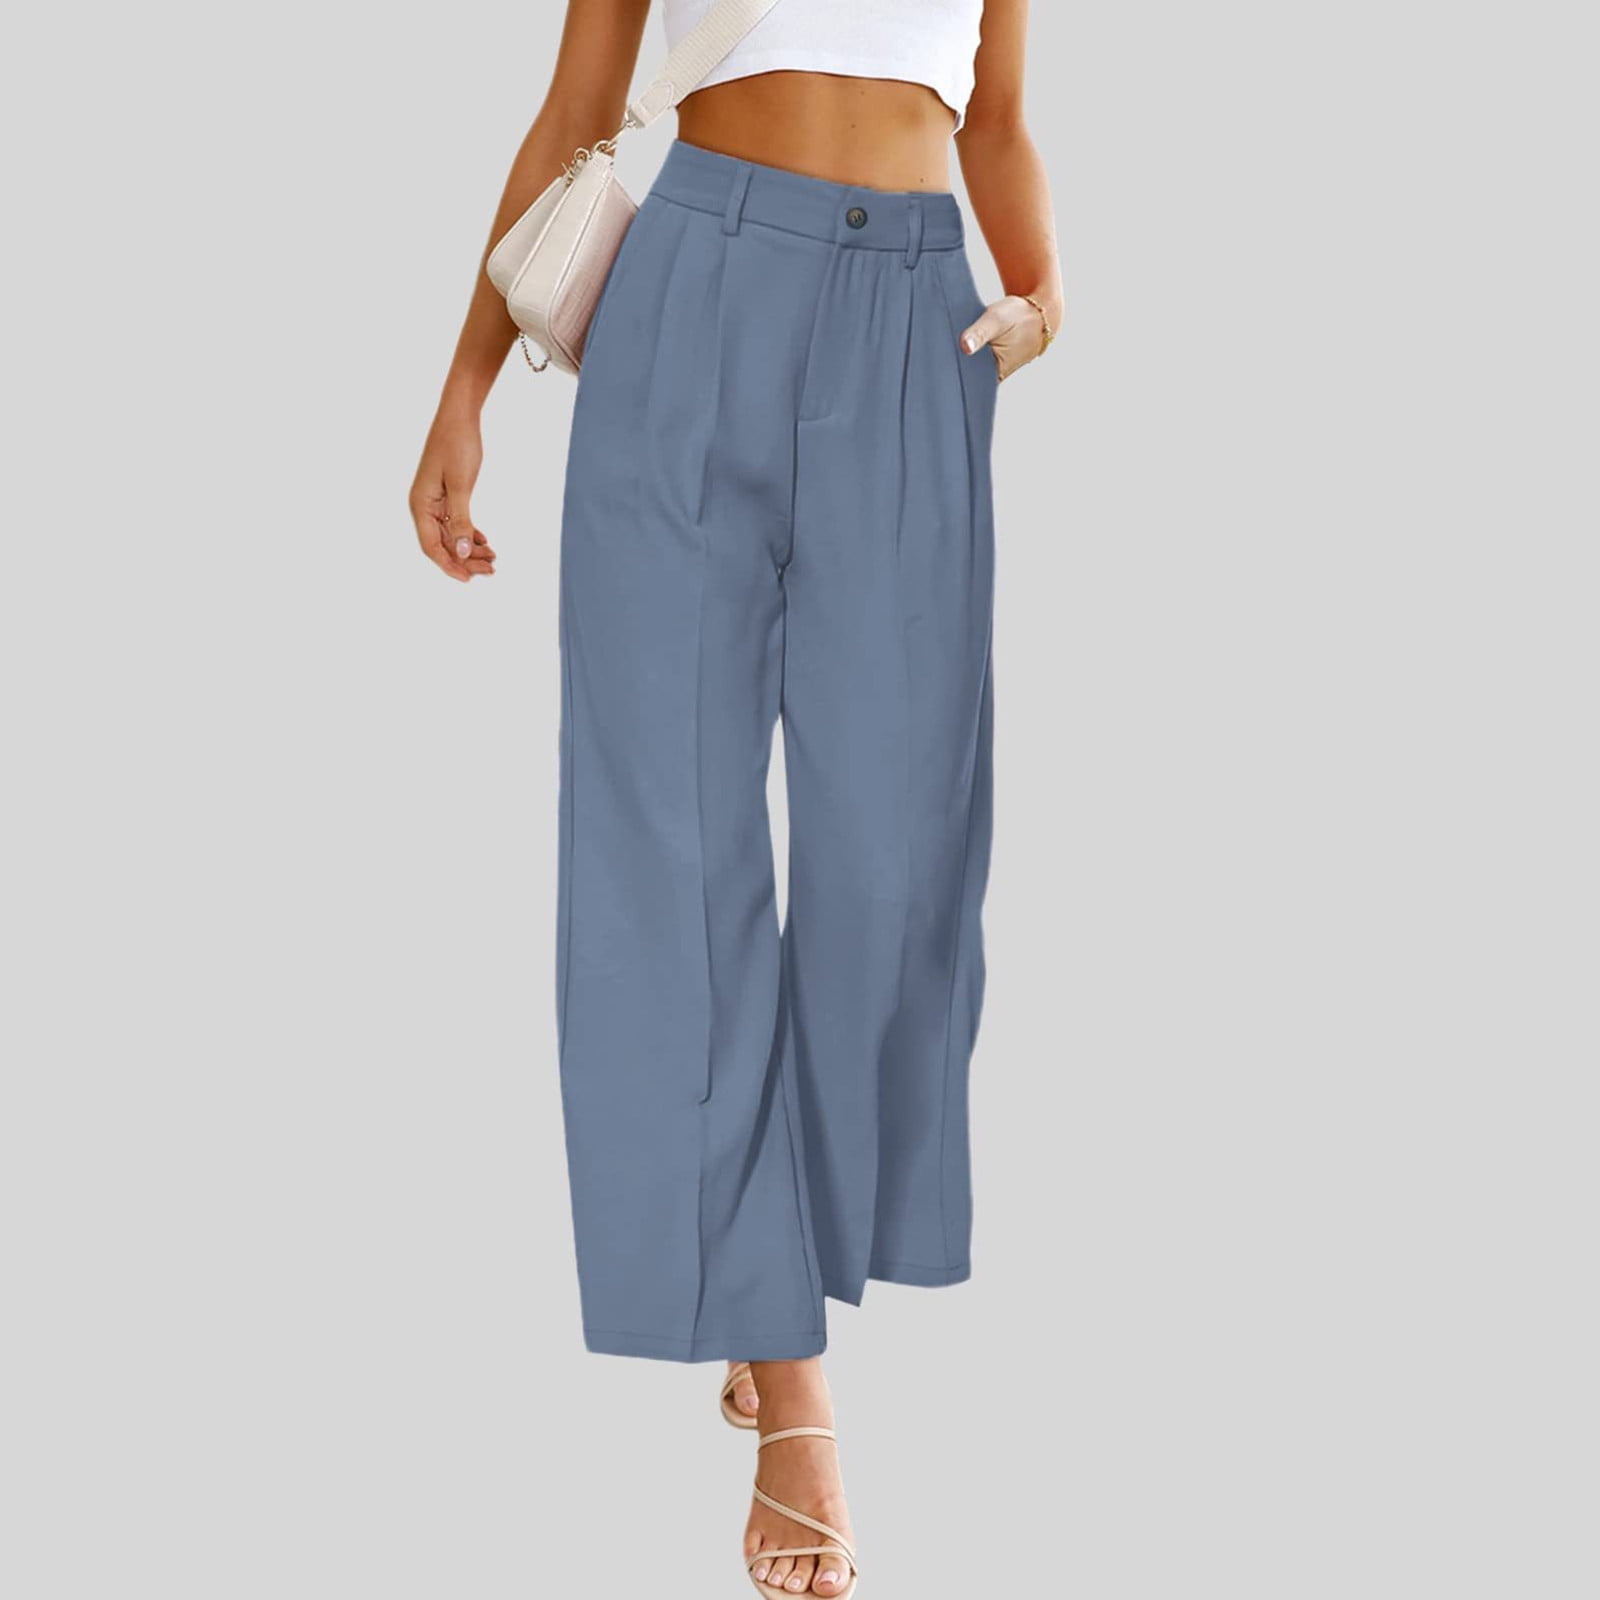 YWDJ Palazzo Pants for Women Dressy Petite With Pockets High